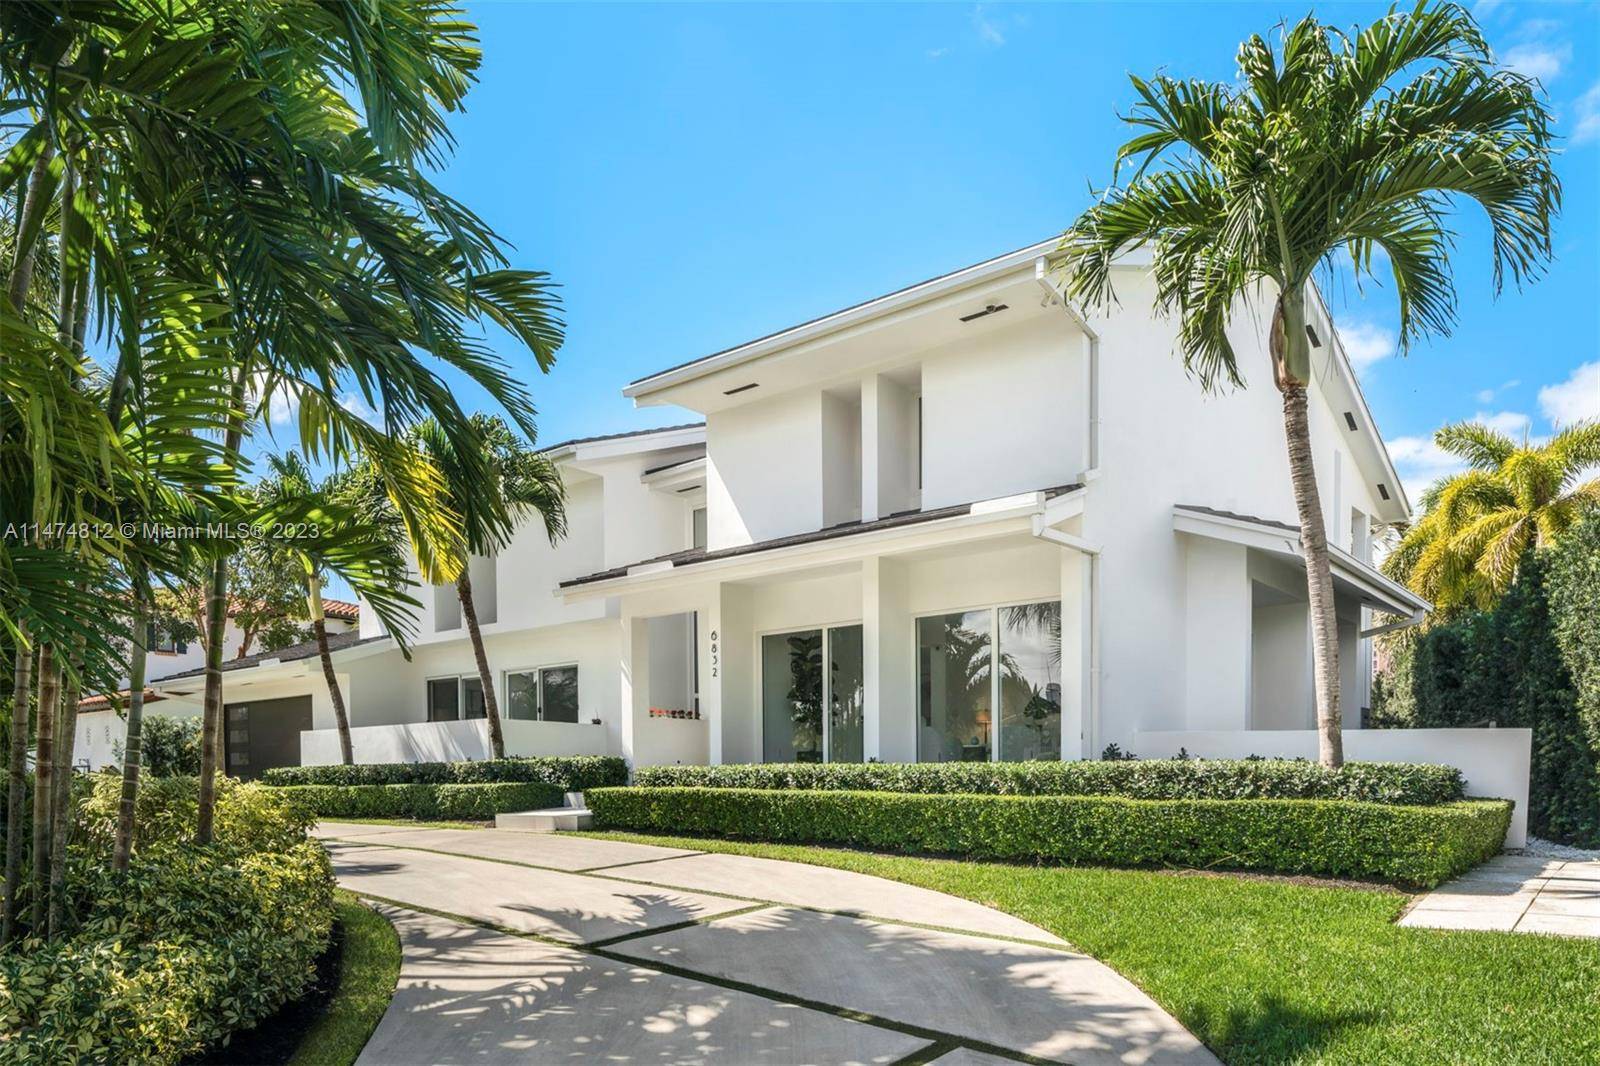 Fully remodeled 6, 819 SF waterfront home in the highly sought after Coral Gables gated community of Sunrise Harbour, with 5 bedrooms and 6 bathrooms.